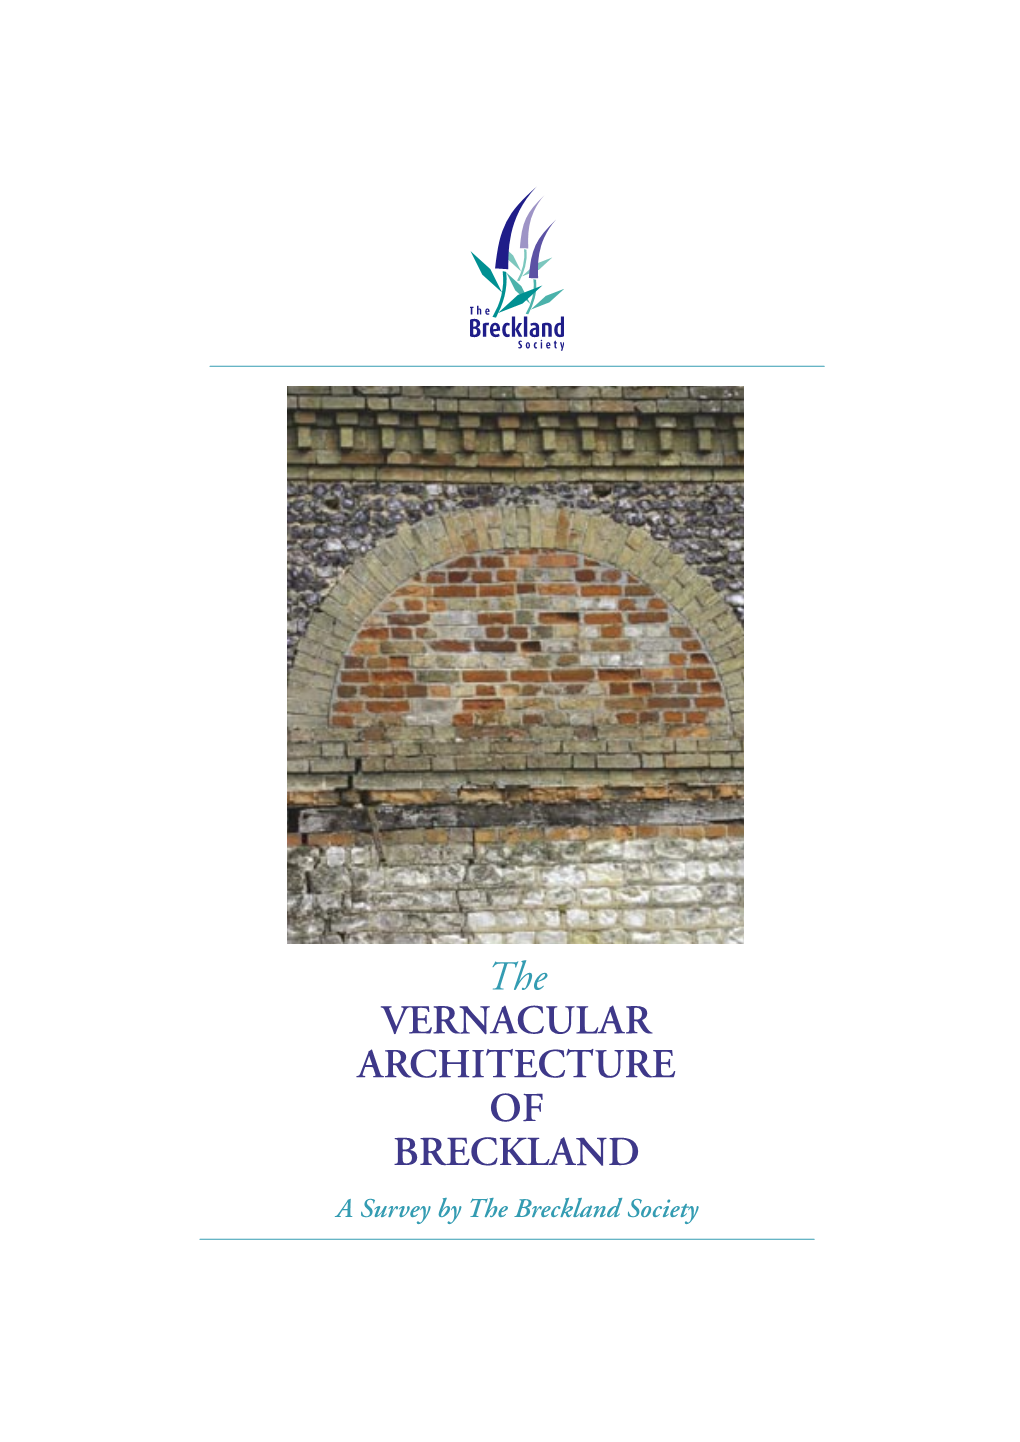 The VERNACULAR ARCHITECTURE of BRECKLAND a Survey by the Breckland Society ©Text, Layout and Use of All Images in This Publication: the Breckland Society 2007